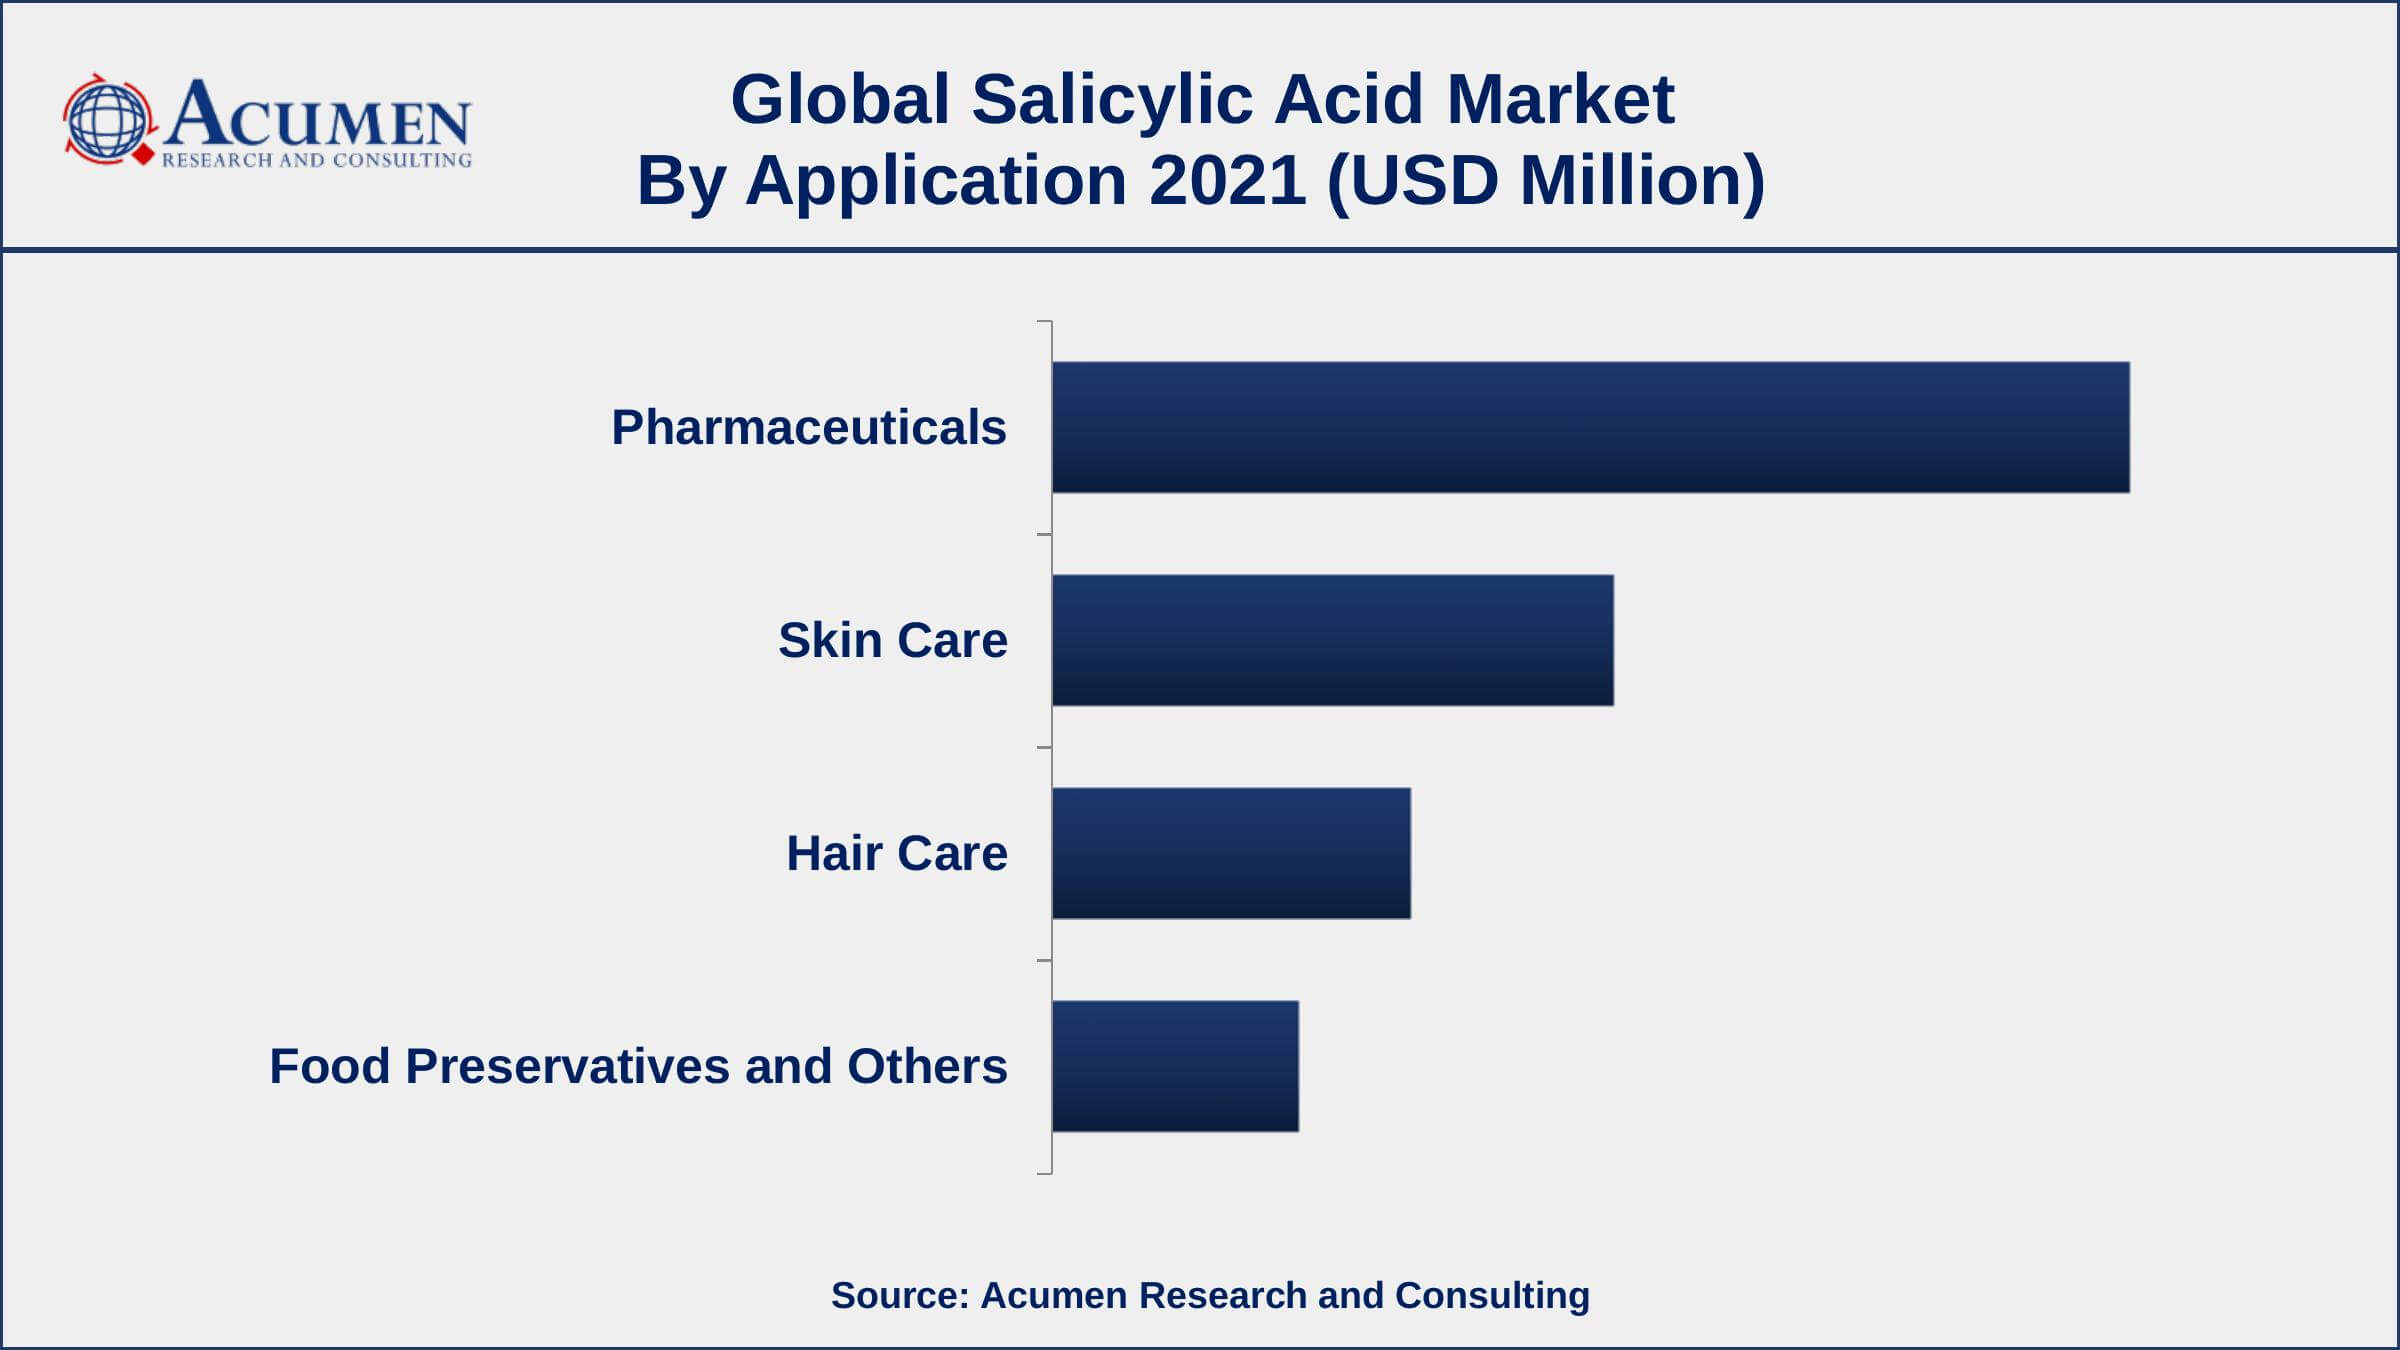 Based on application, pharmaceutical segment accounted for over 48% of the overall market share in 2021